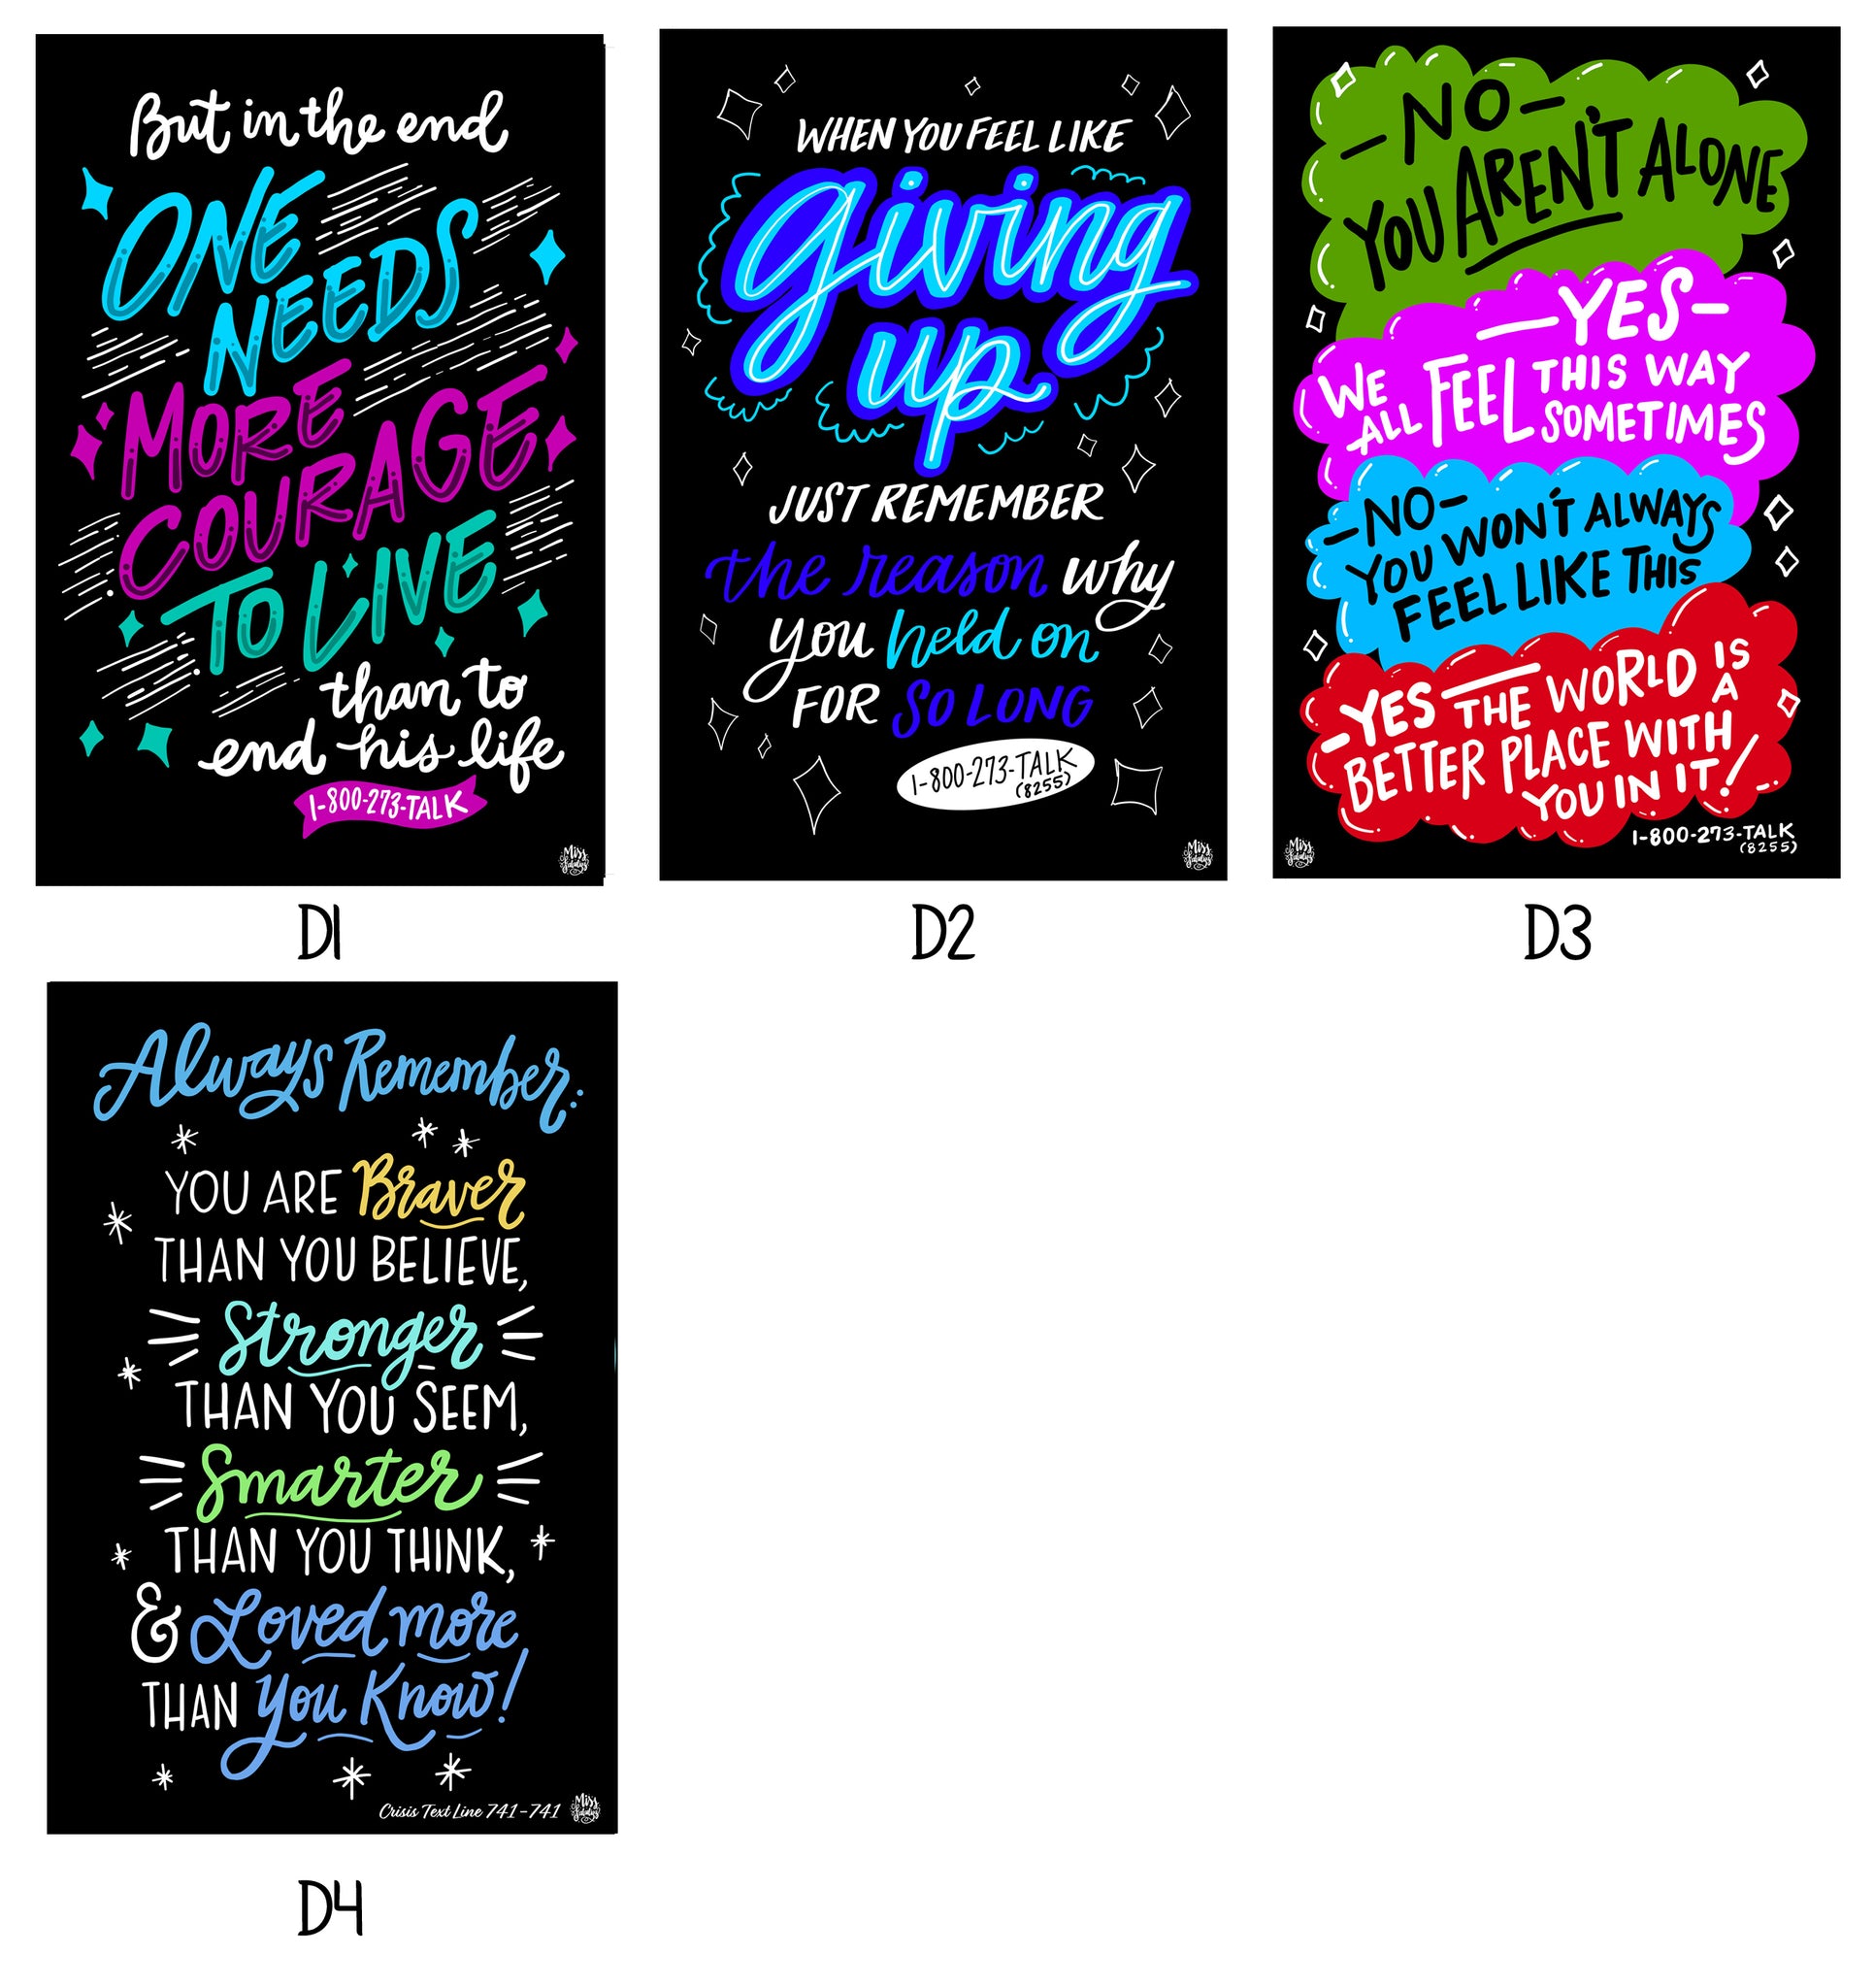 Suicide Prevention - Single Decals | Build Your Own Collection D